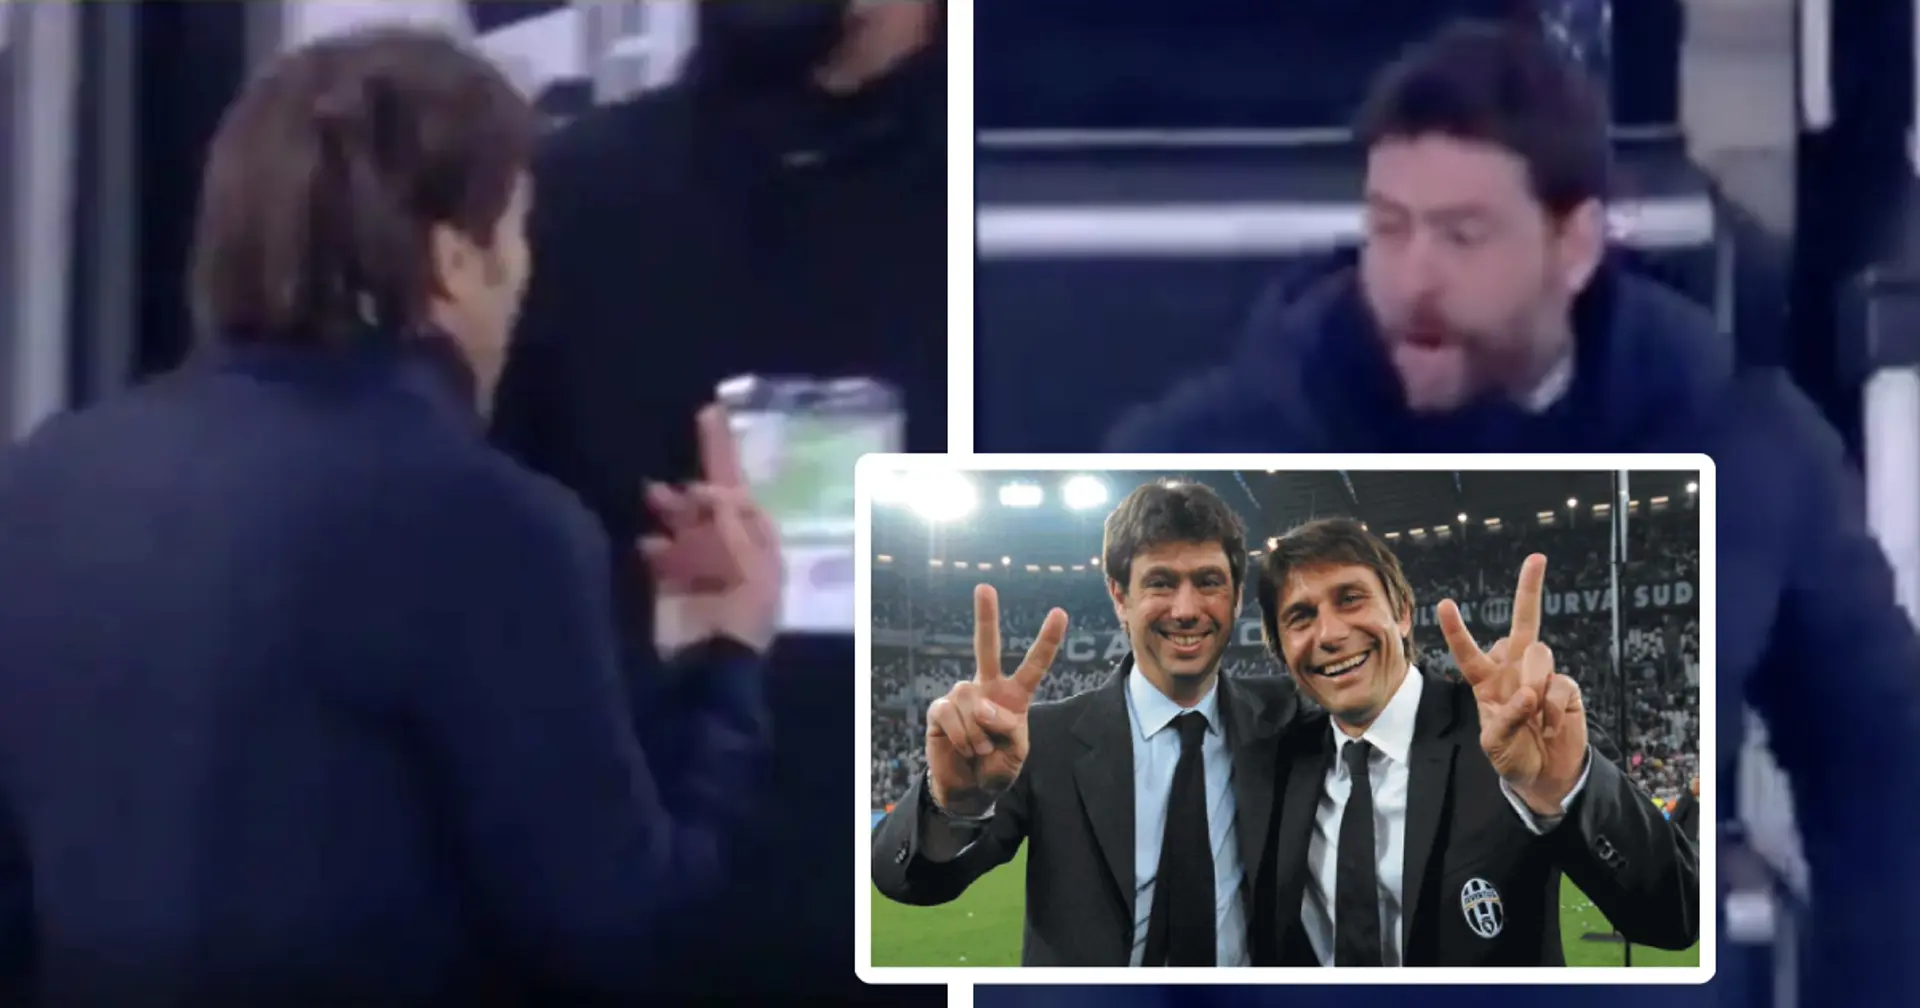 Conte shows middle finger to Juve bench, Agnelli replies, ‘put that finger in your ass, b* * * * *’